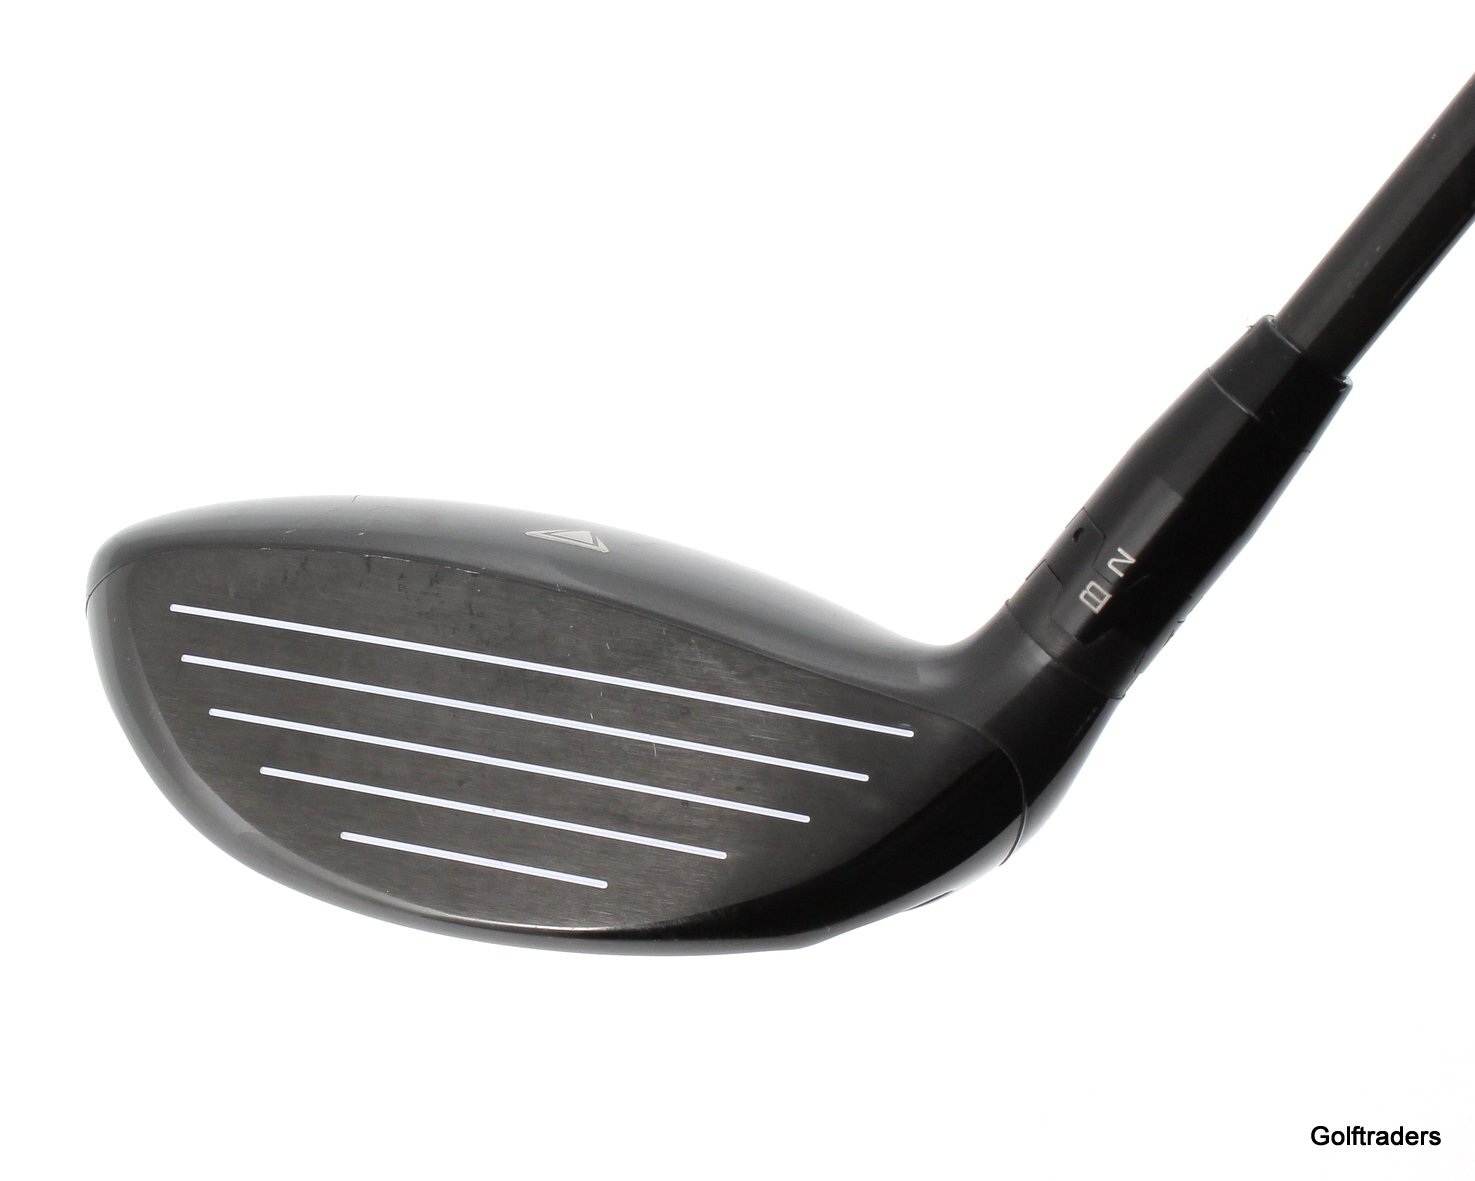 BUY NEW AND USED CLUBS ONLINE